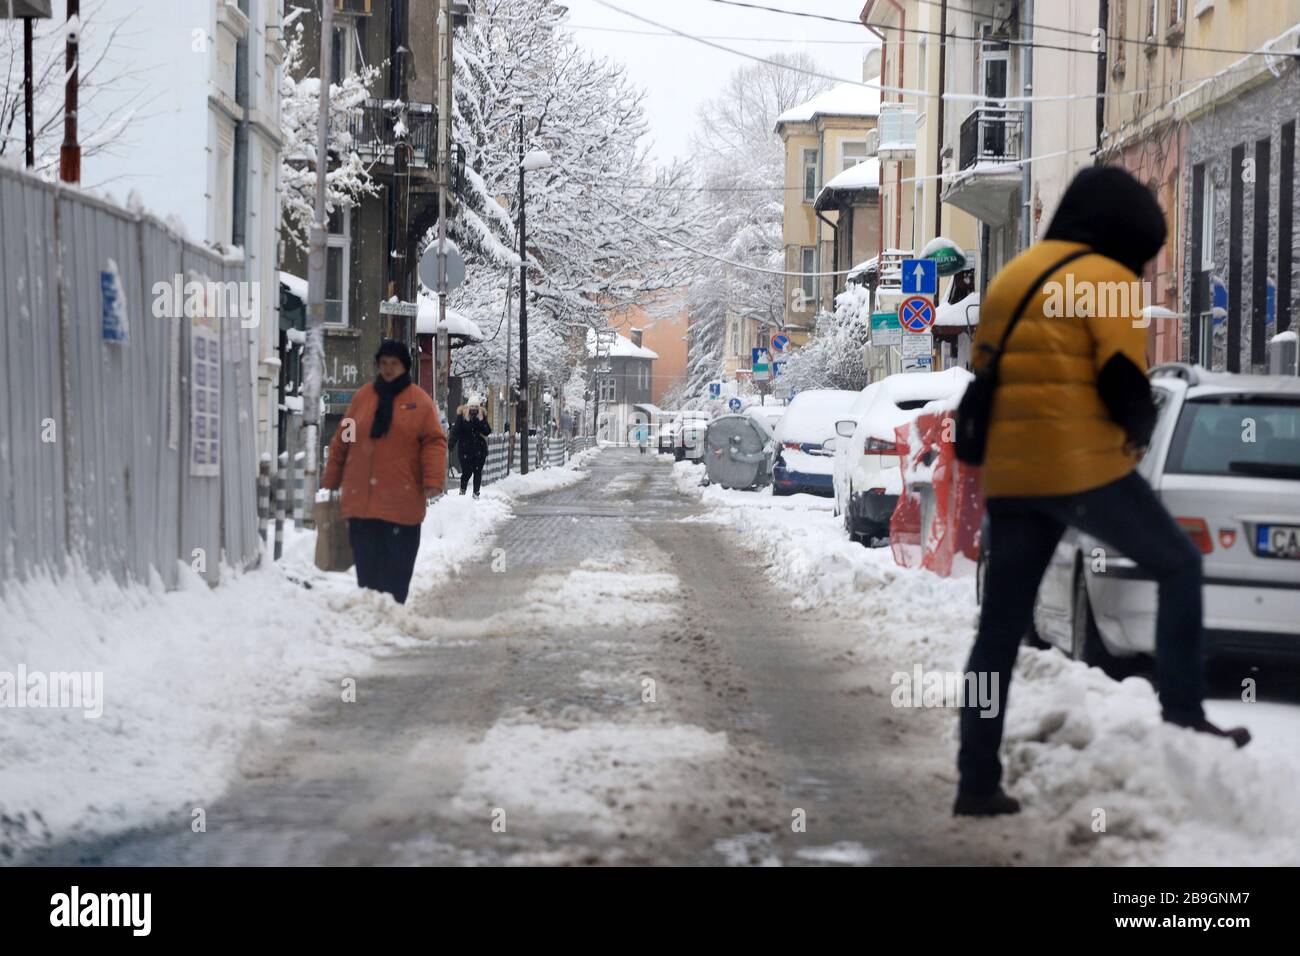 People walk in snow drifts on uncleaned street, after snow blizzard in Sofia, Bulgaria on march 24, 2020 Stock Photo